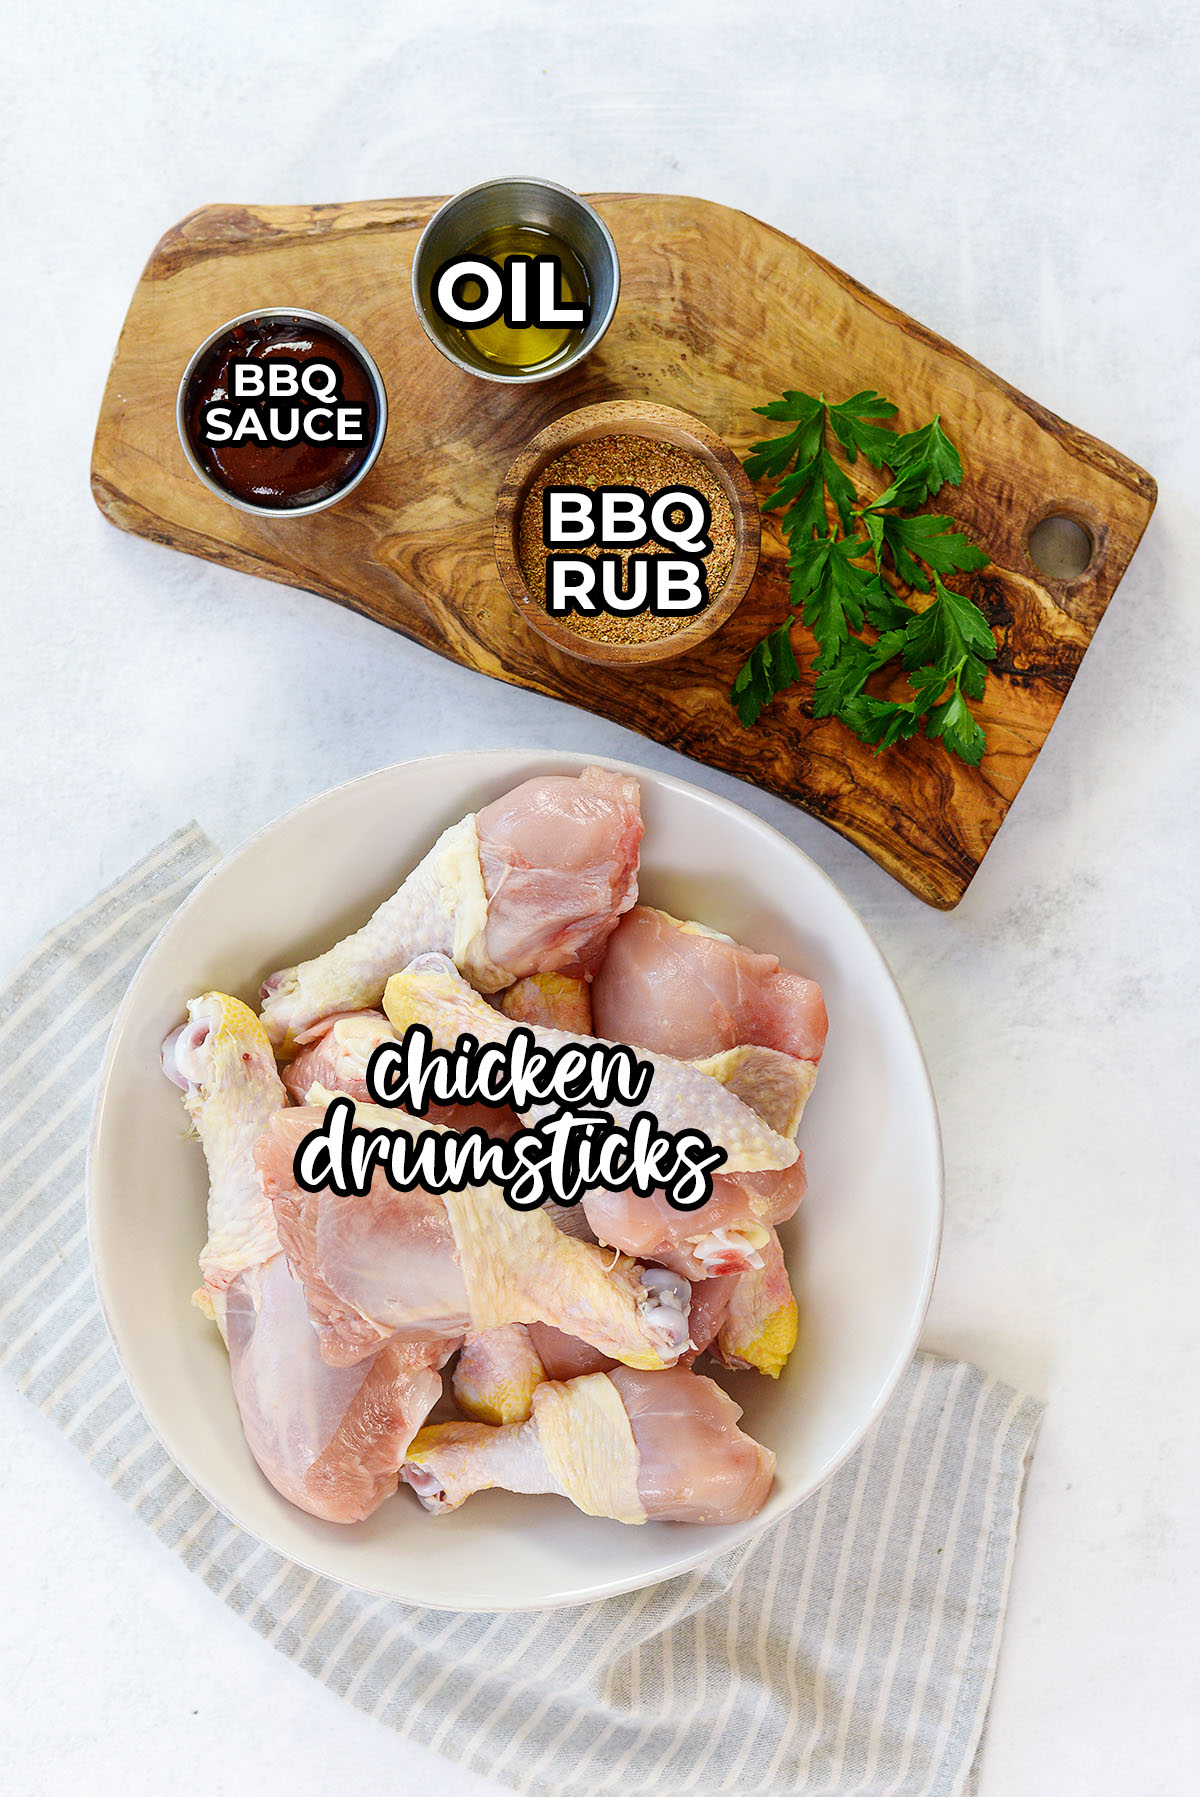 BBQ chicken leg ingredients spread out on a countertop.